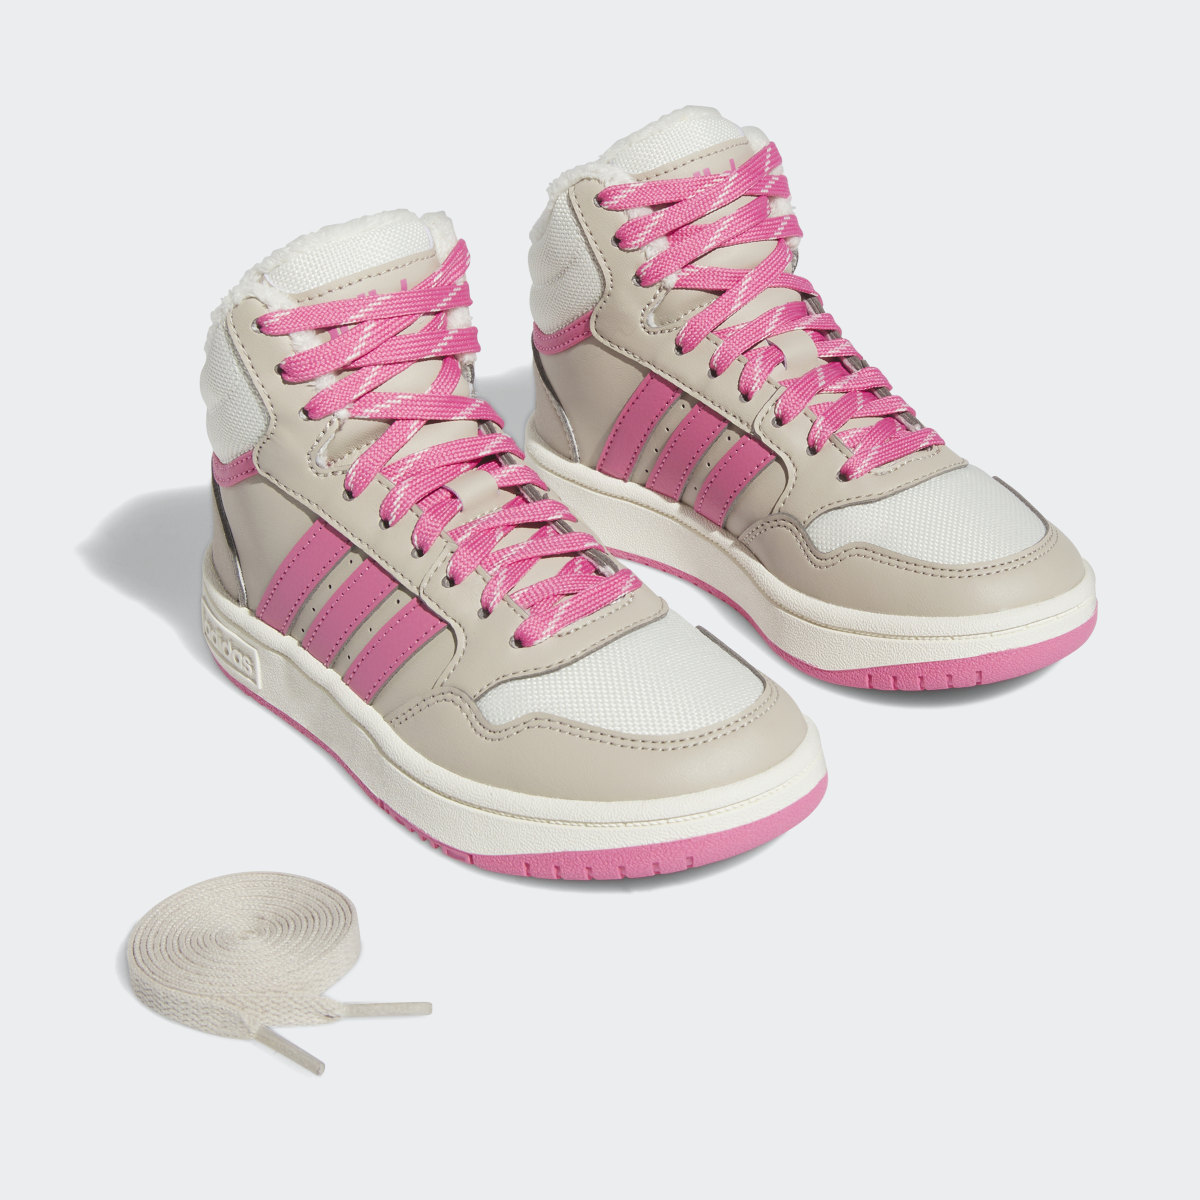 Adidas Hoops Mid 3.0 Shoes Kids. 8